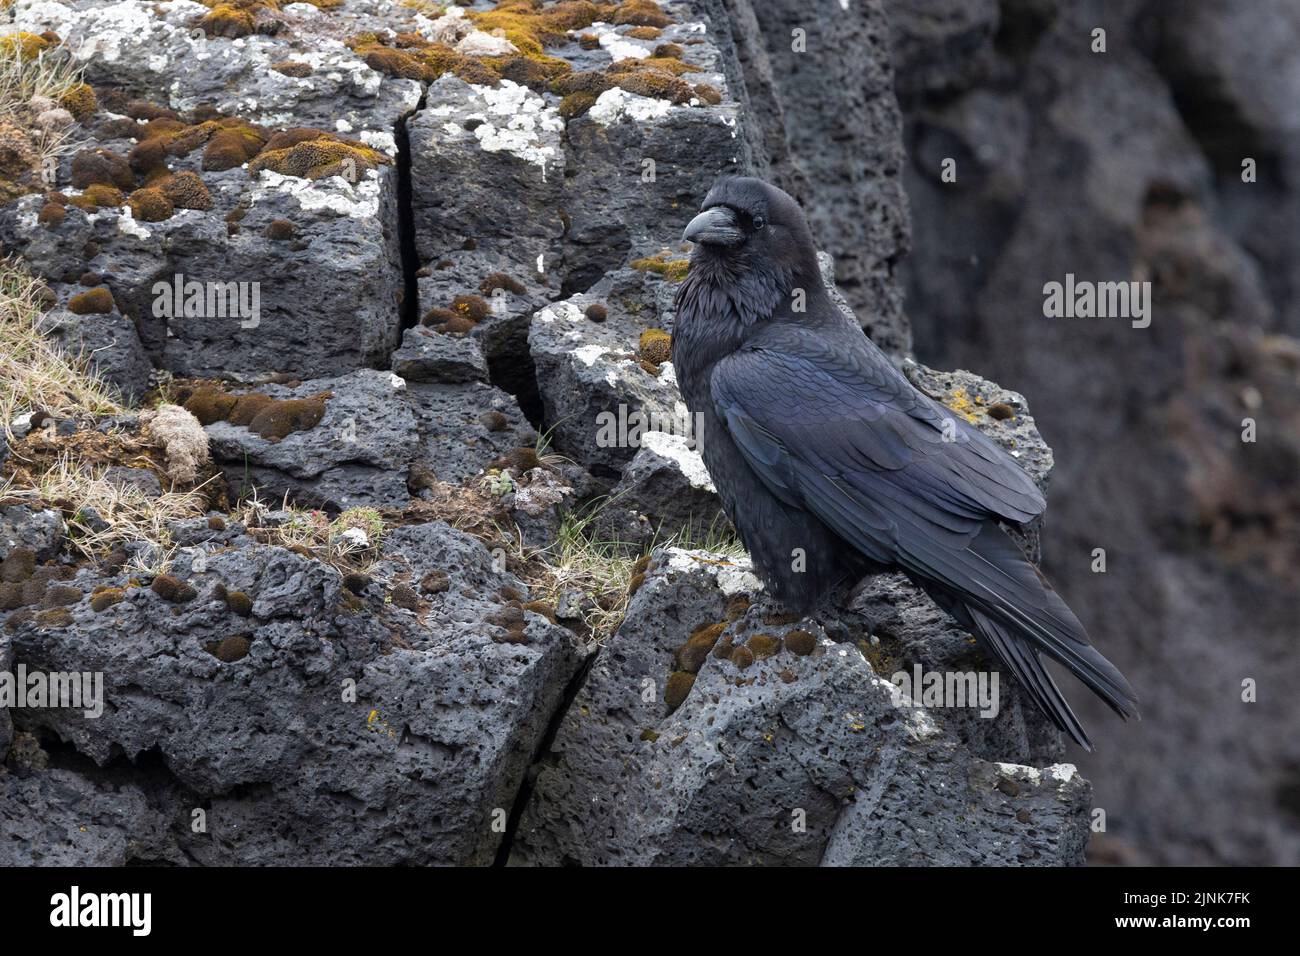 Common Raven Corvus corax varius), side view of an adult standing on a basalt rock, Western Region, Iceland Stock Photo